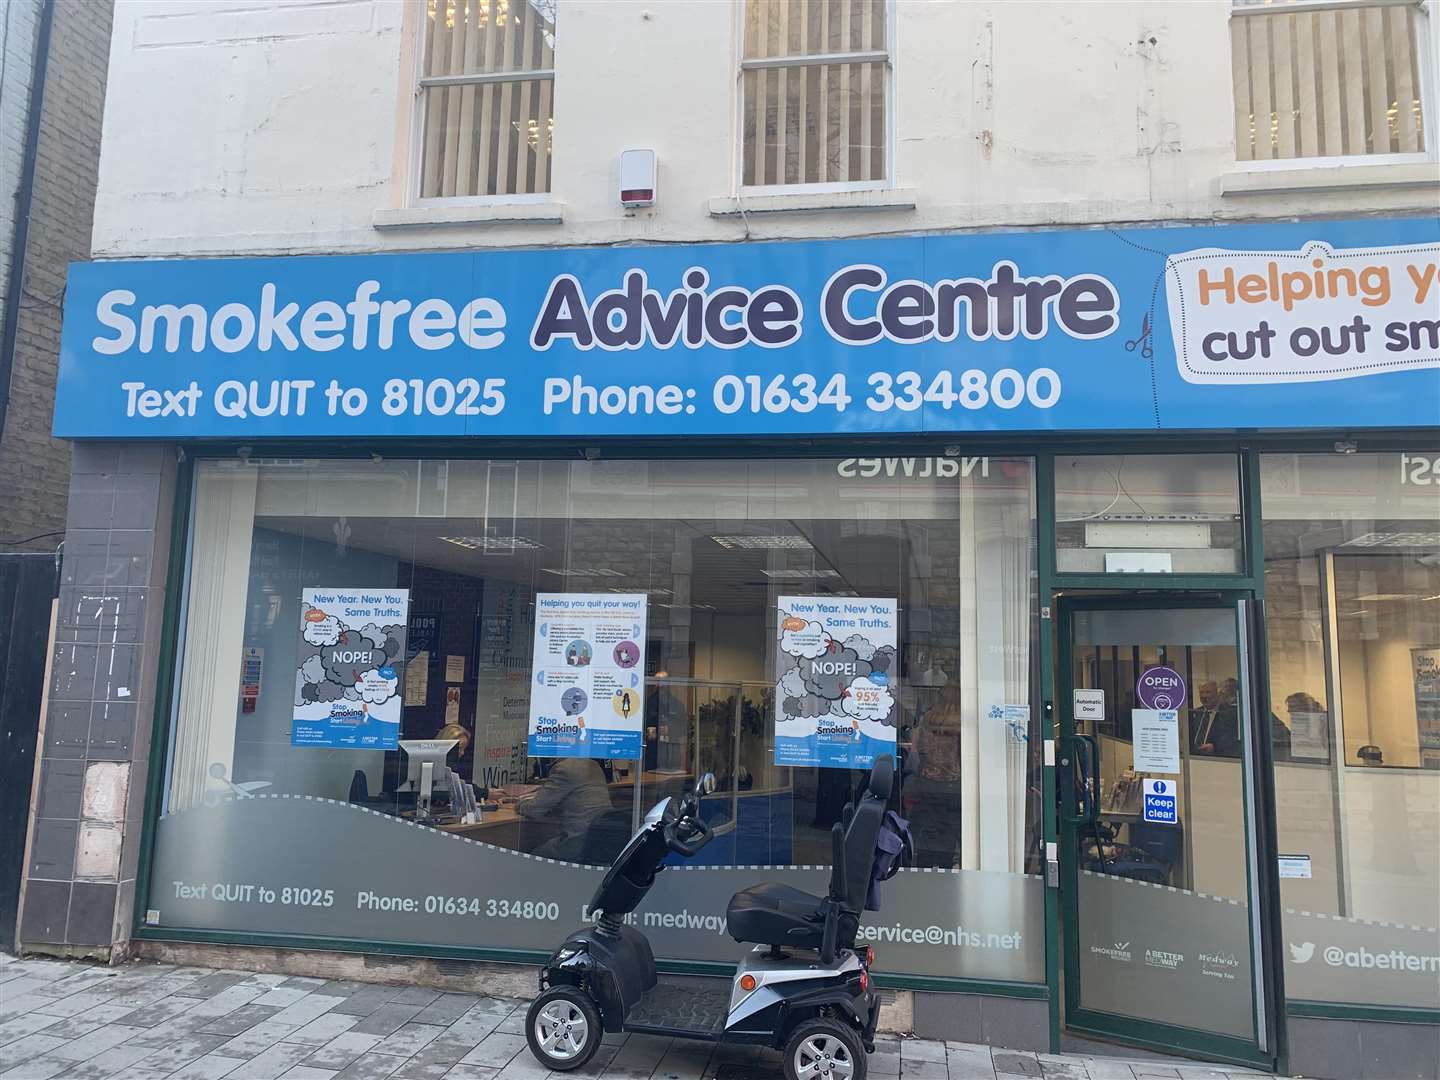 The Smokefree Advice Centre in Railway Street, Chatham Picture: Katie Nelson